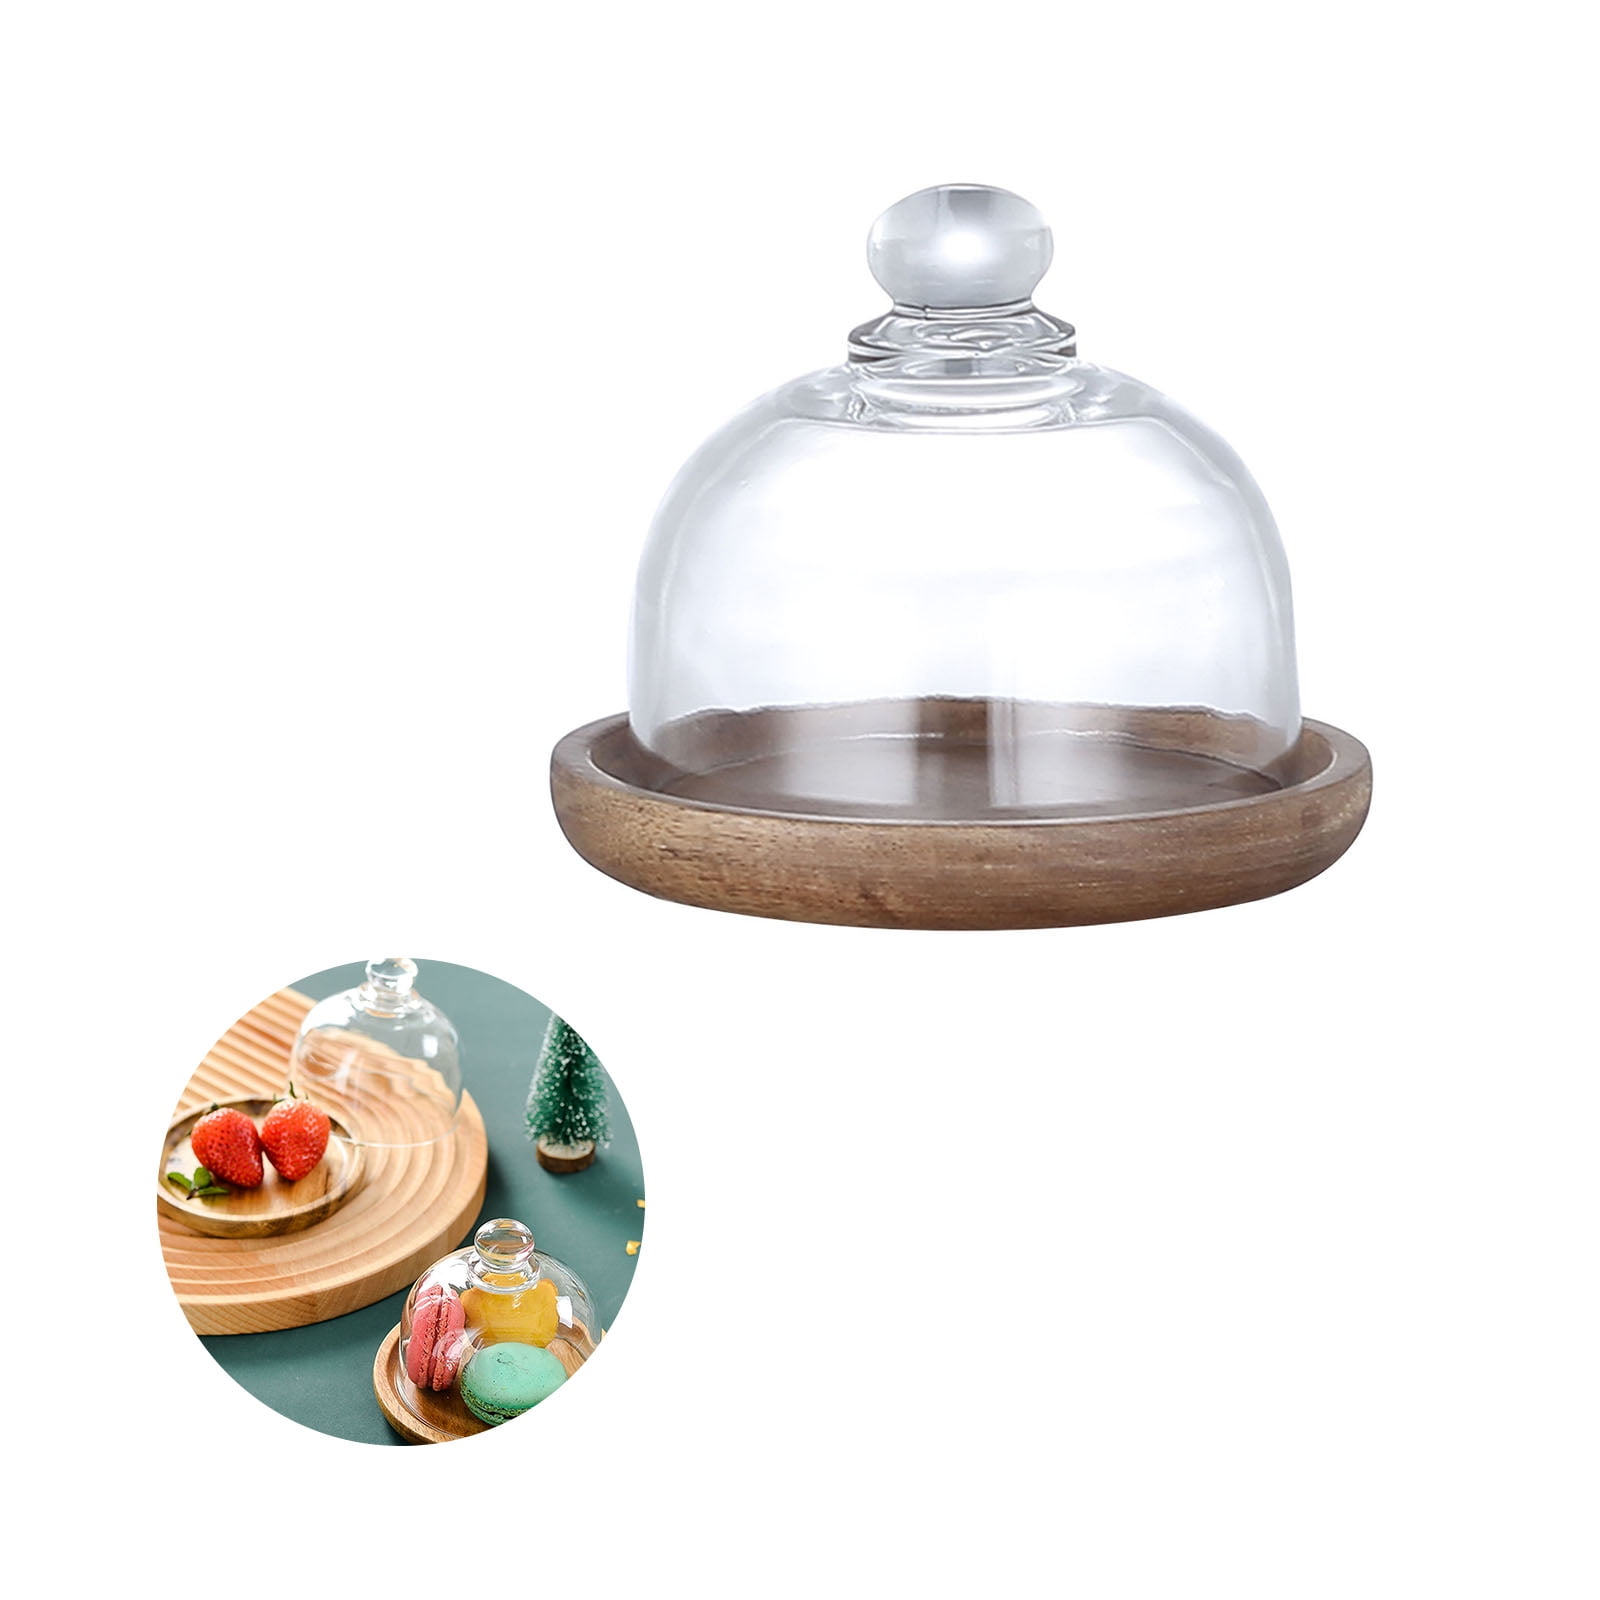 Clearance Sale! Wooden Plate Butter Dish With Cover Cake Dessert